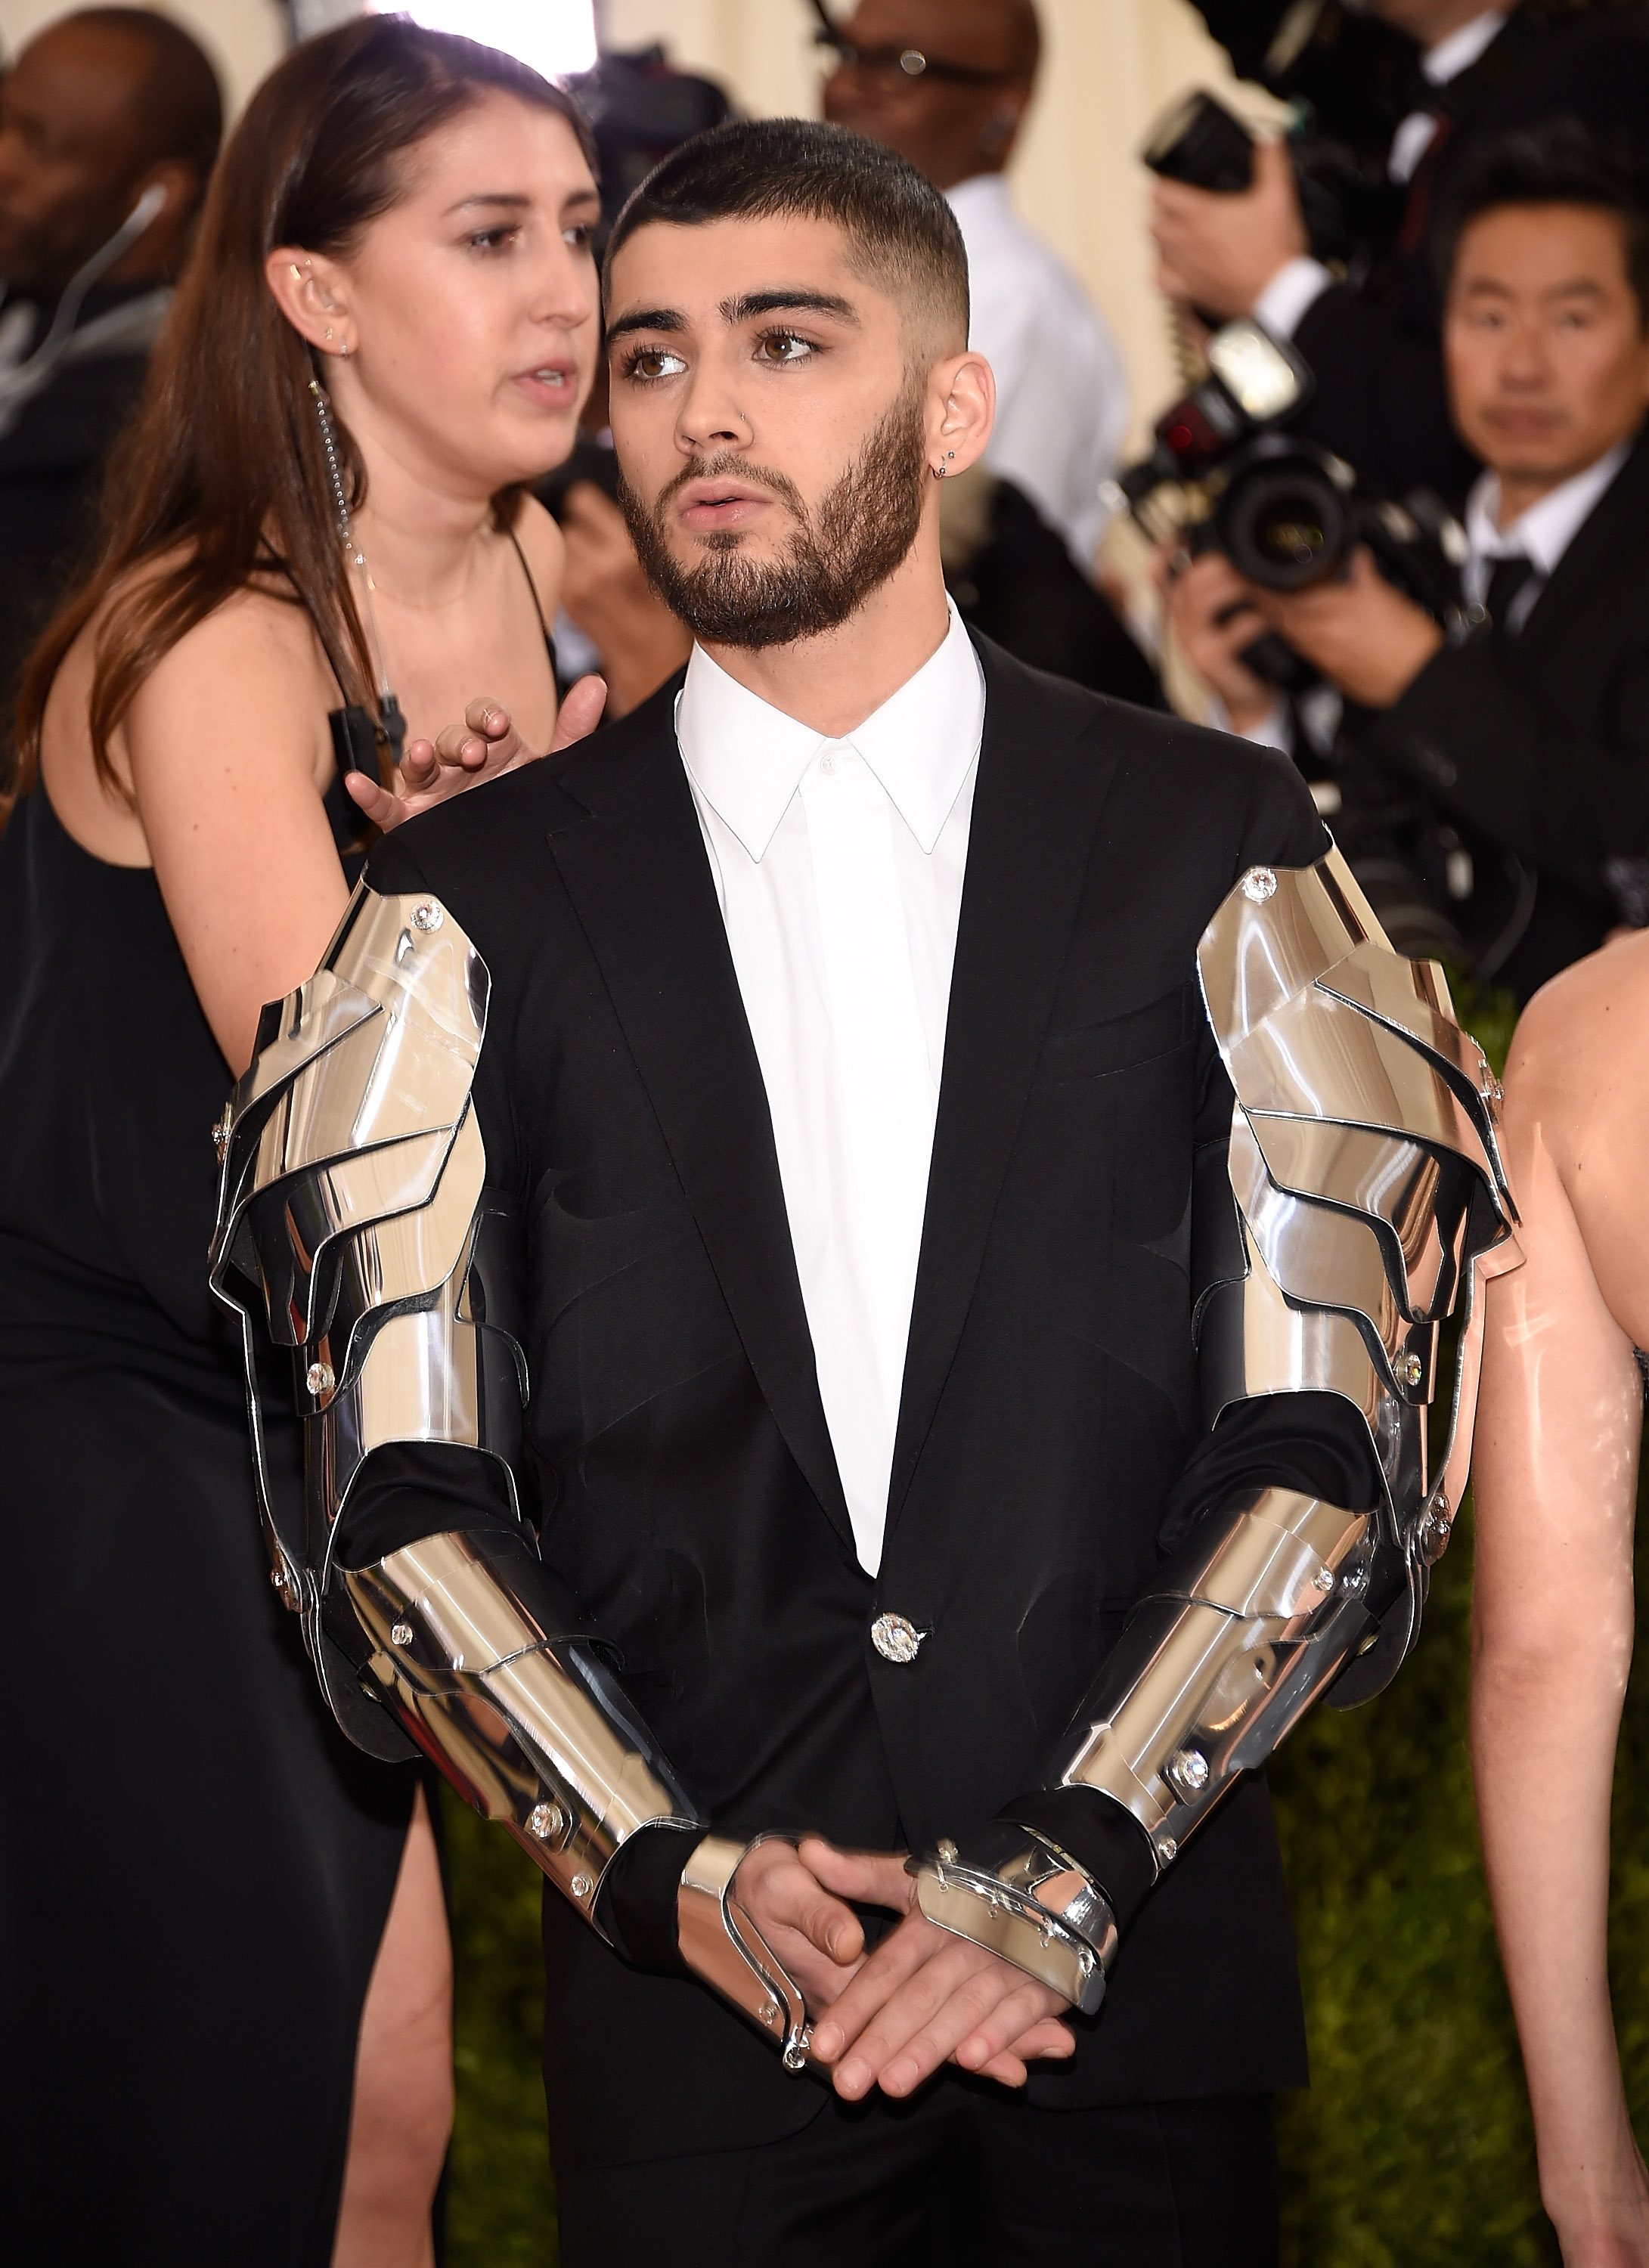 Zayn Malik at the Met Gala red carpet in 2016 | Source: Getty Images